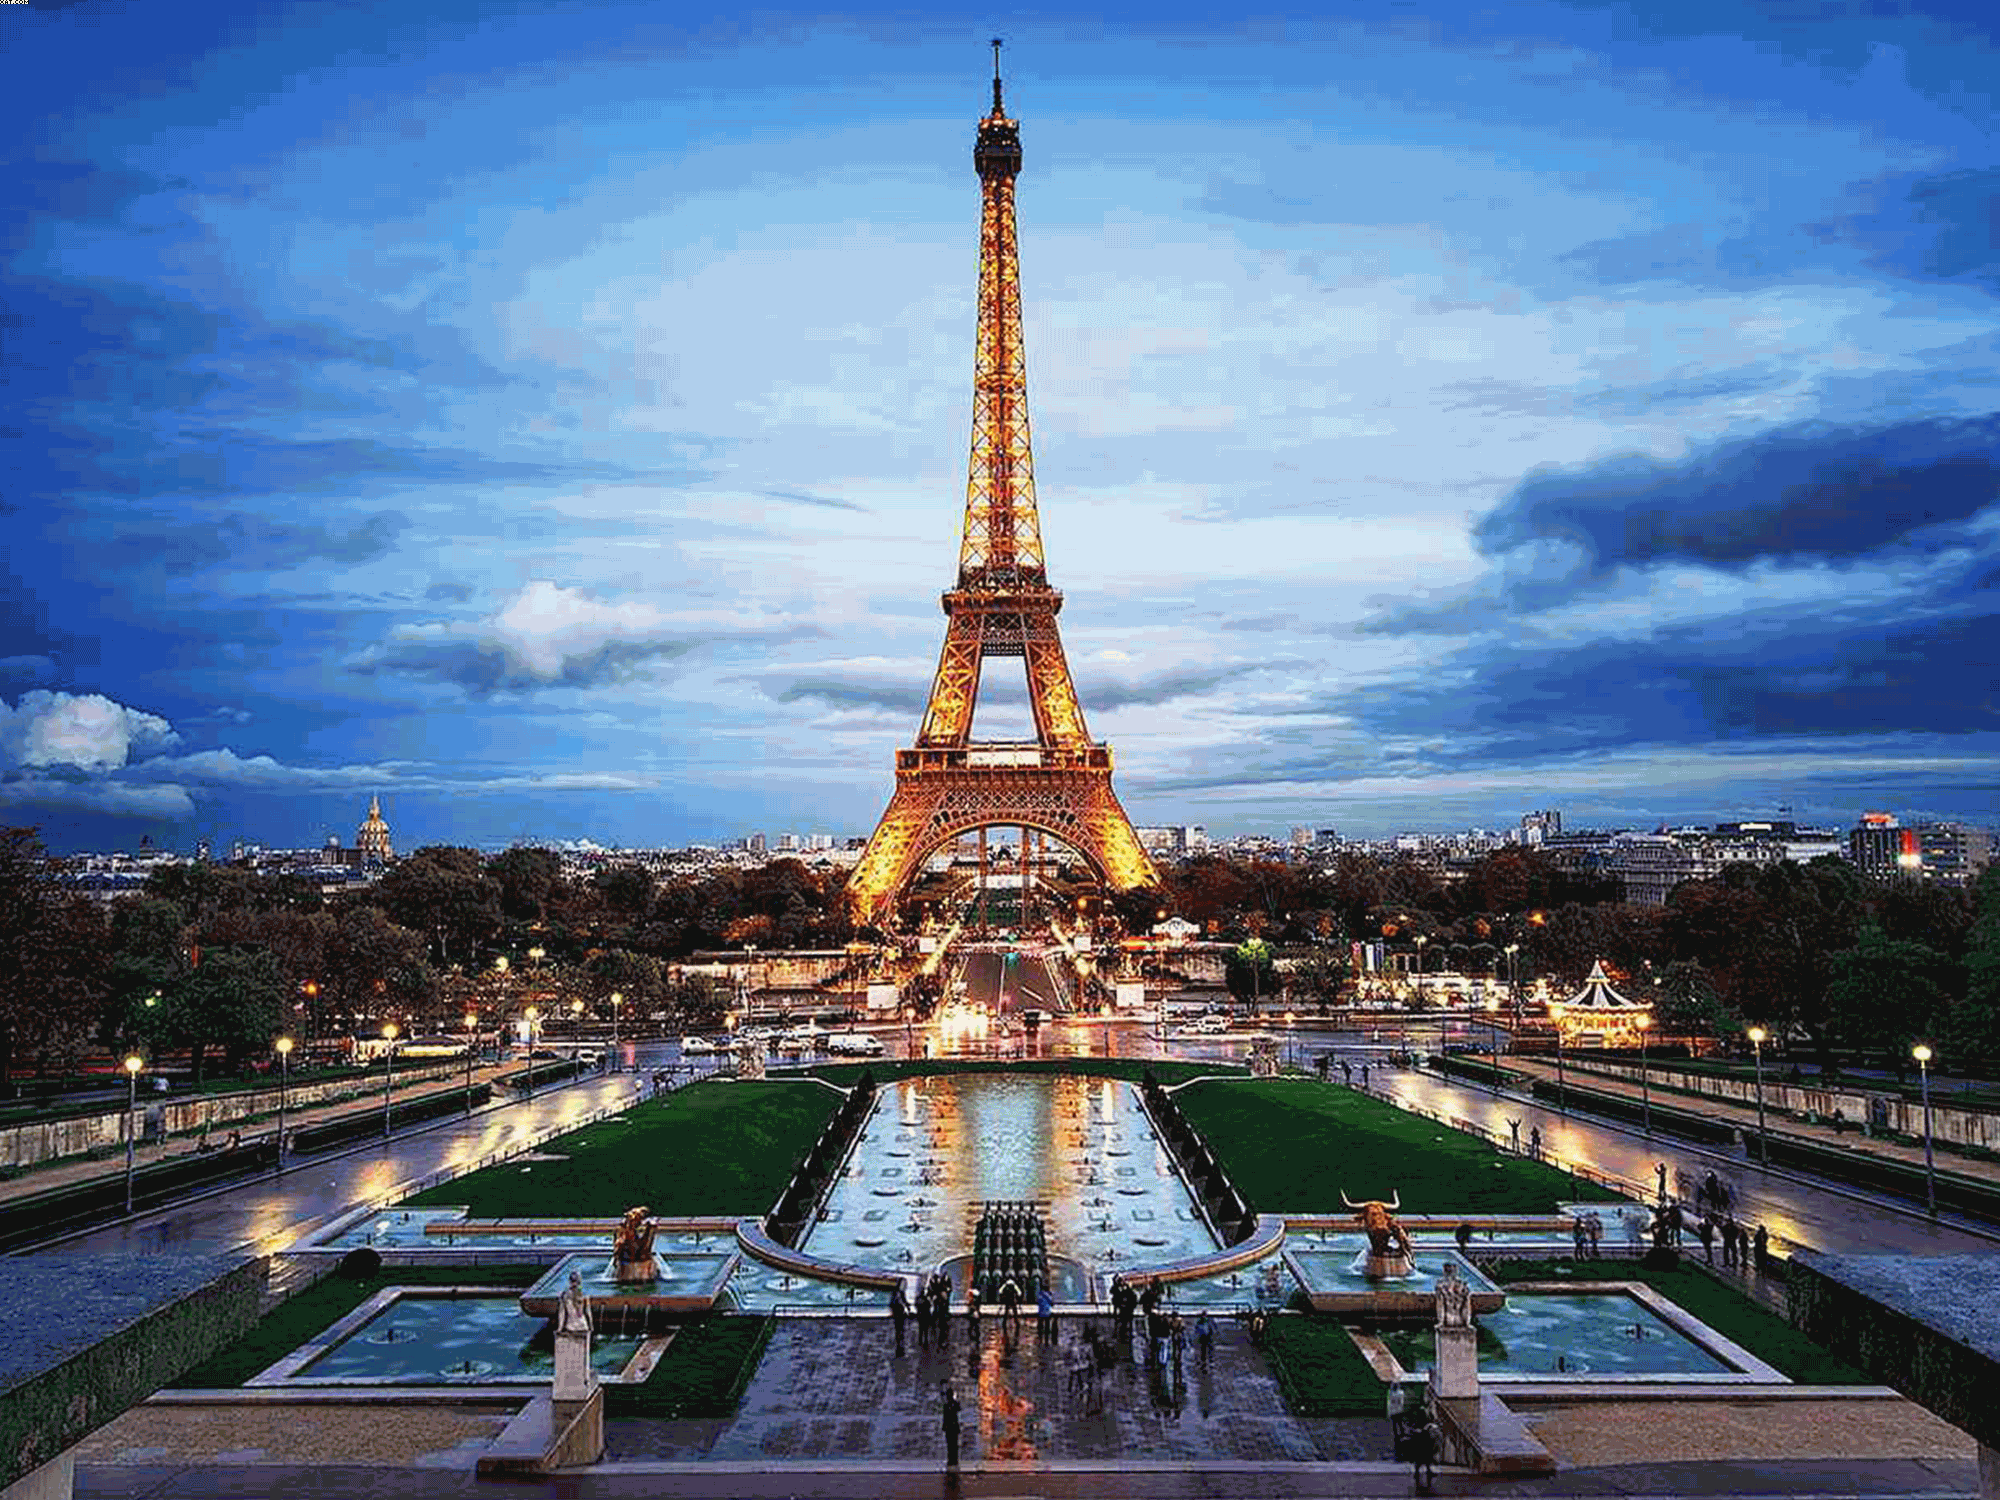 Hotels Near Eiffel Tower – The Best Accommodation Options with a View